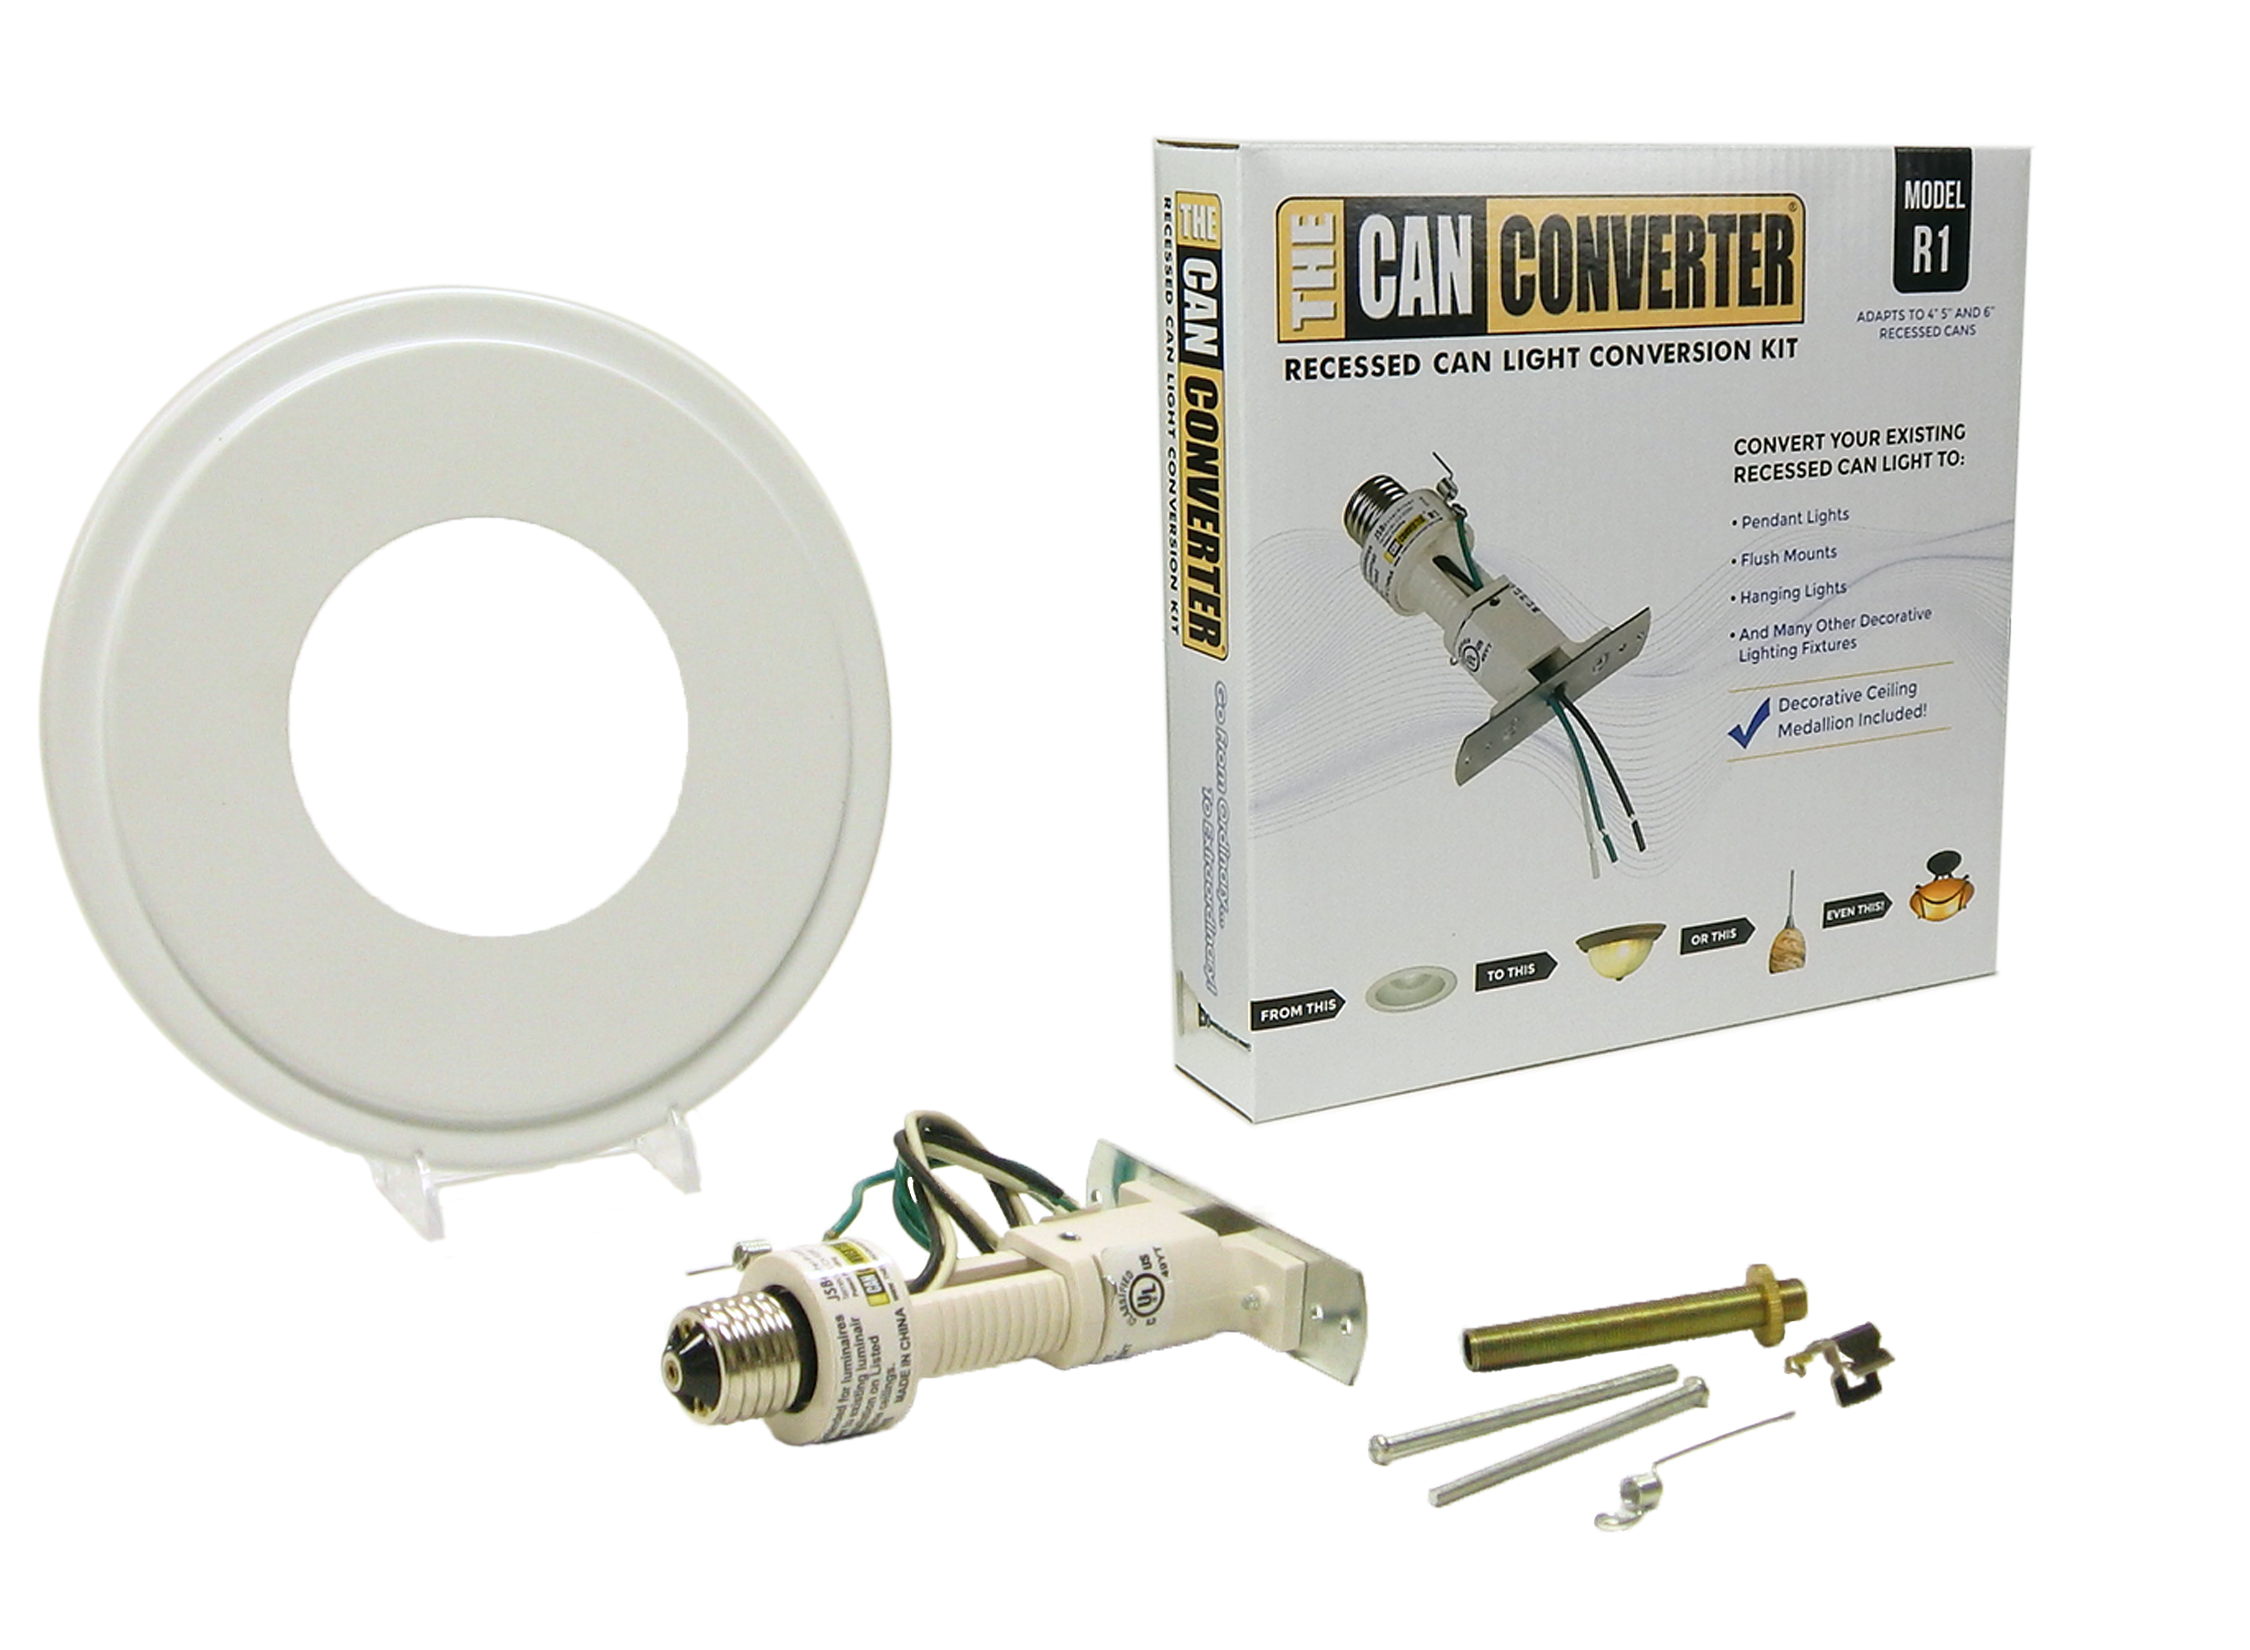 R1 Recessed Can Light Conversion Kit 4